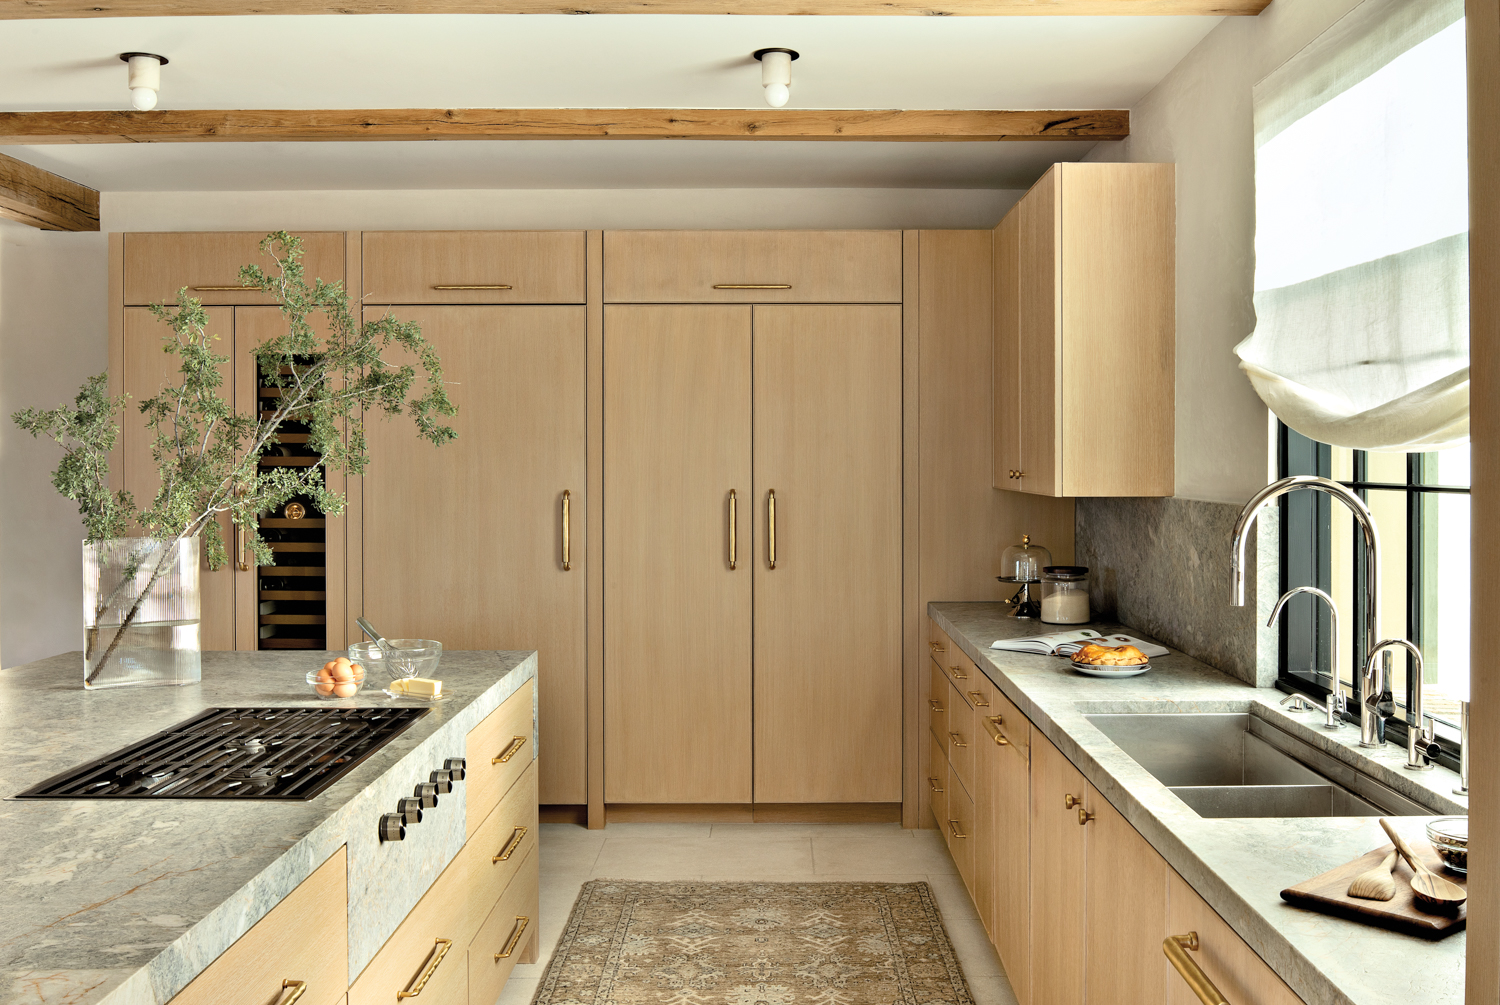 Kitchen with white oak cabinetry...